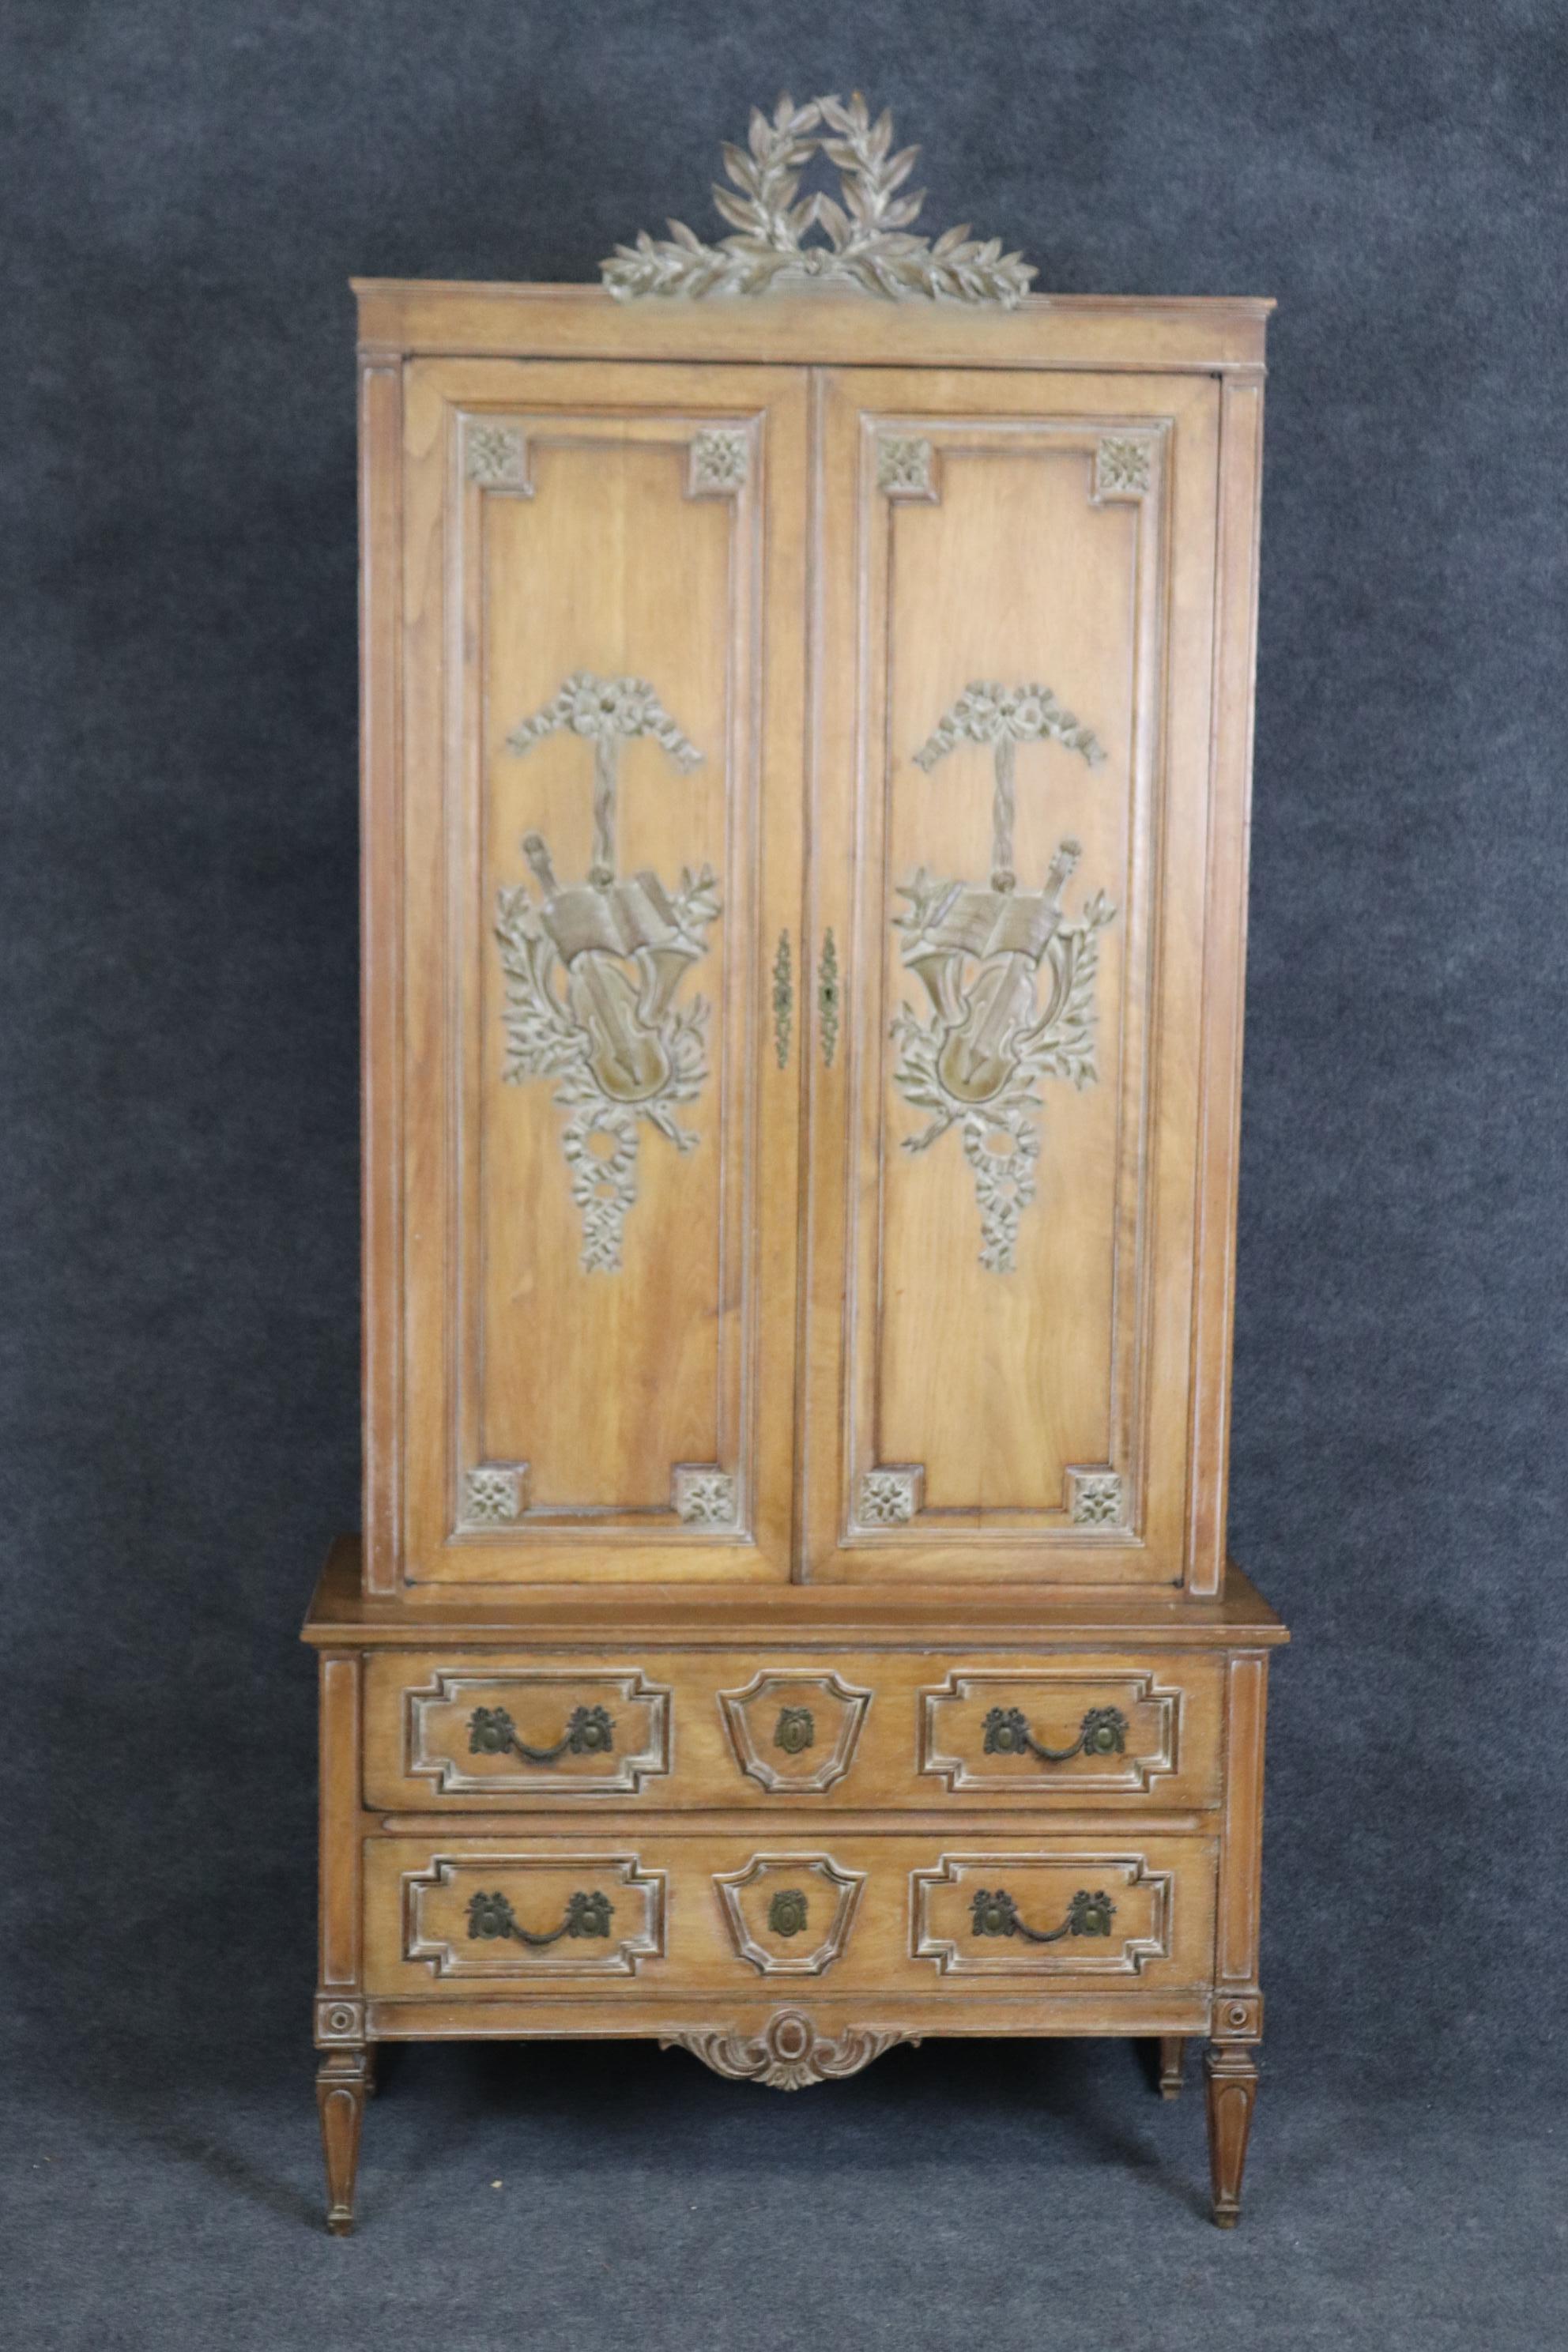 Superb Carved French Auffray Style Louis XVI Limed Walnut Armoire with Wreath In Good Condition For Sale In Swedesboro, NJ